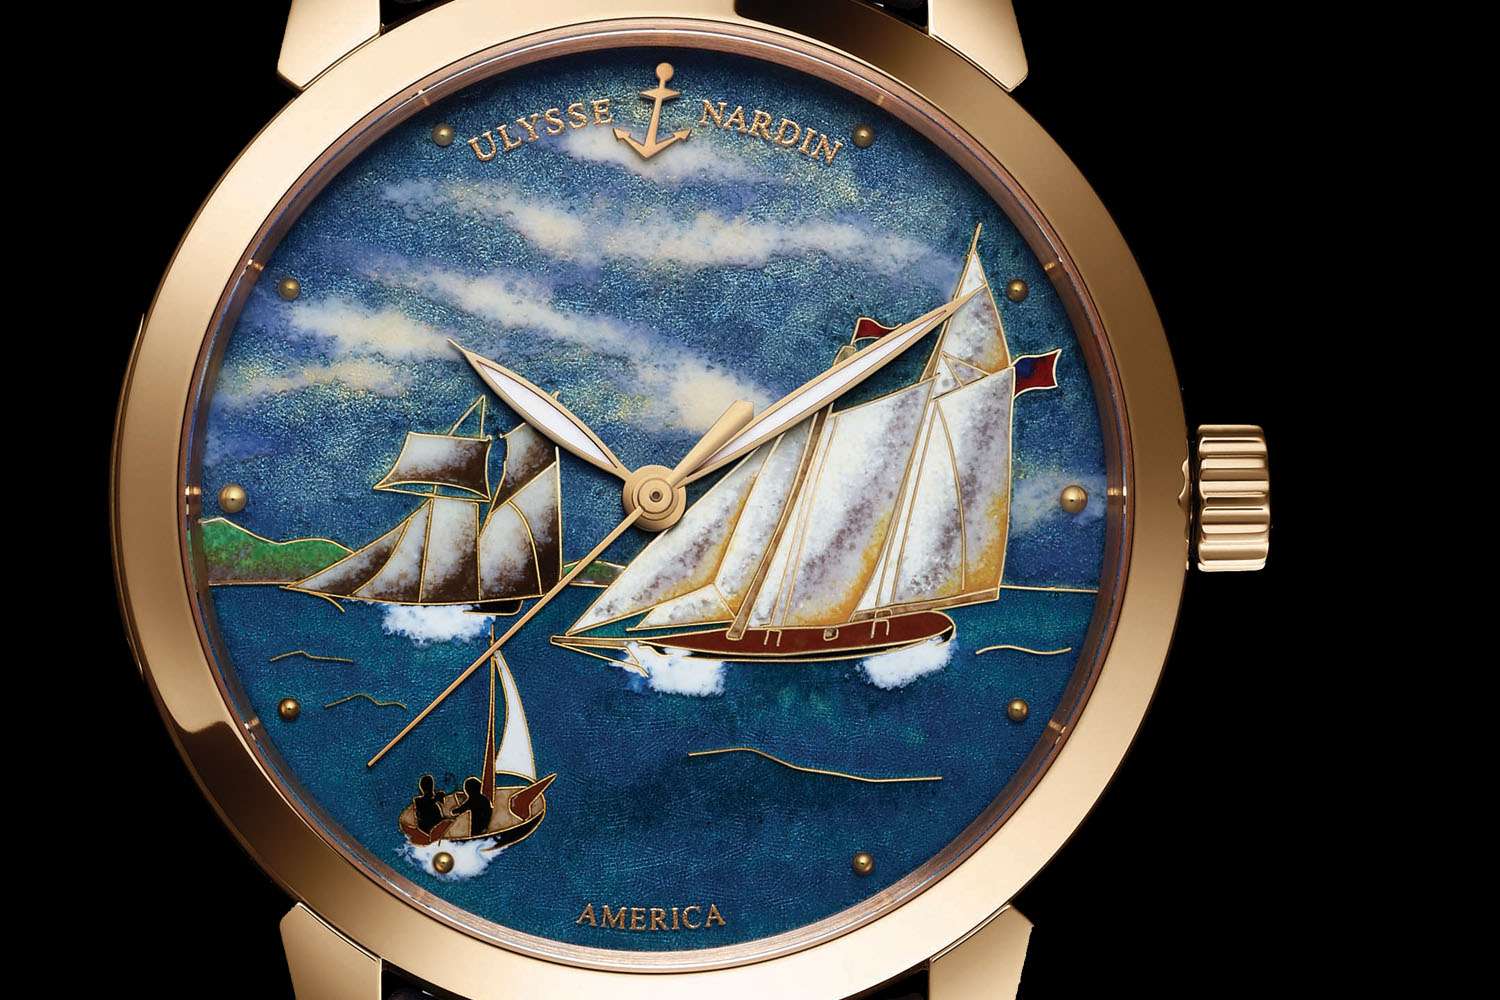 Every year, companies use centuries-old techniques to create intricate timepieces that put aesthetics before gadgetry and hi-tech functionality